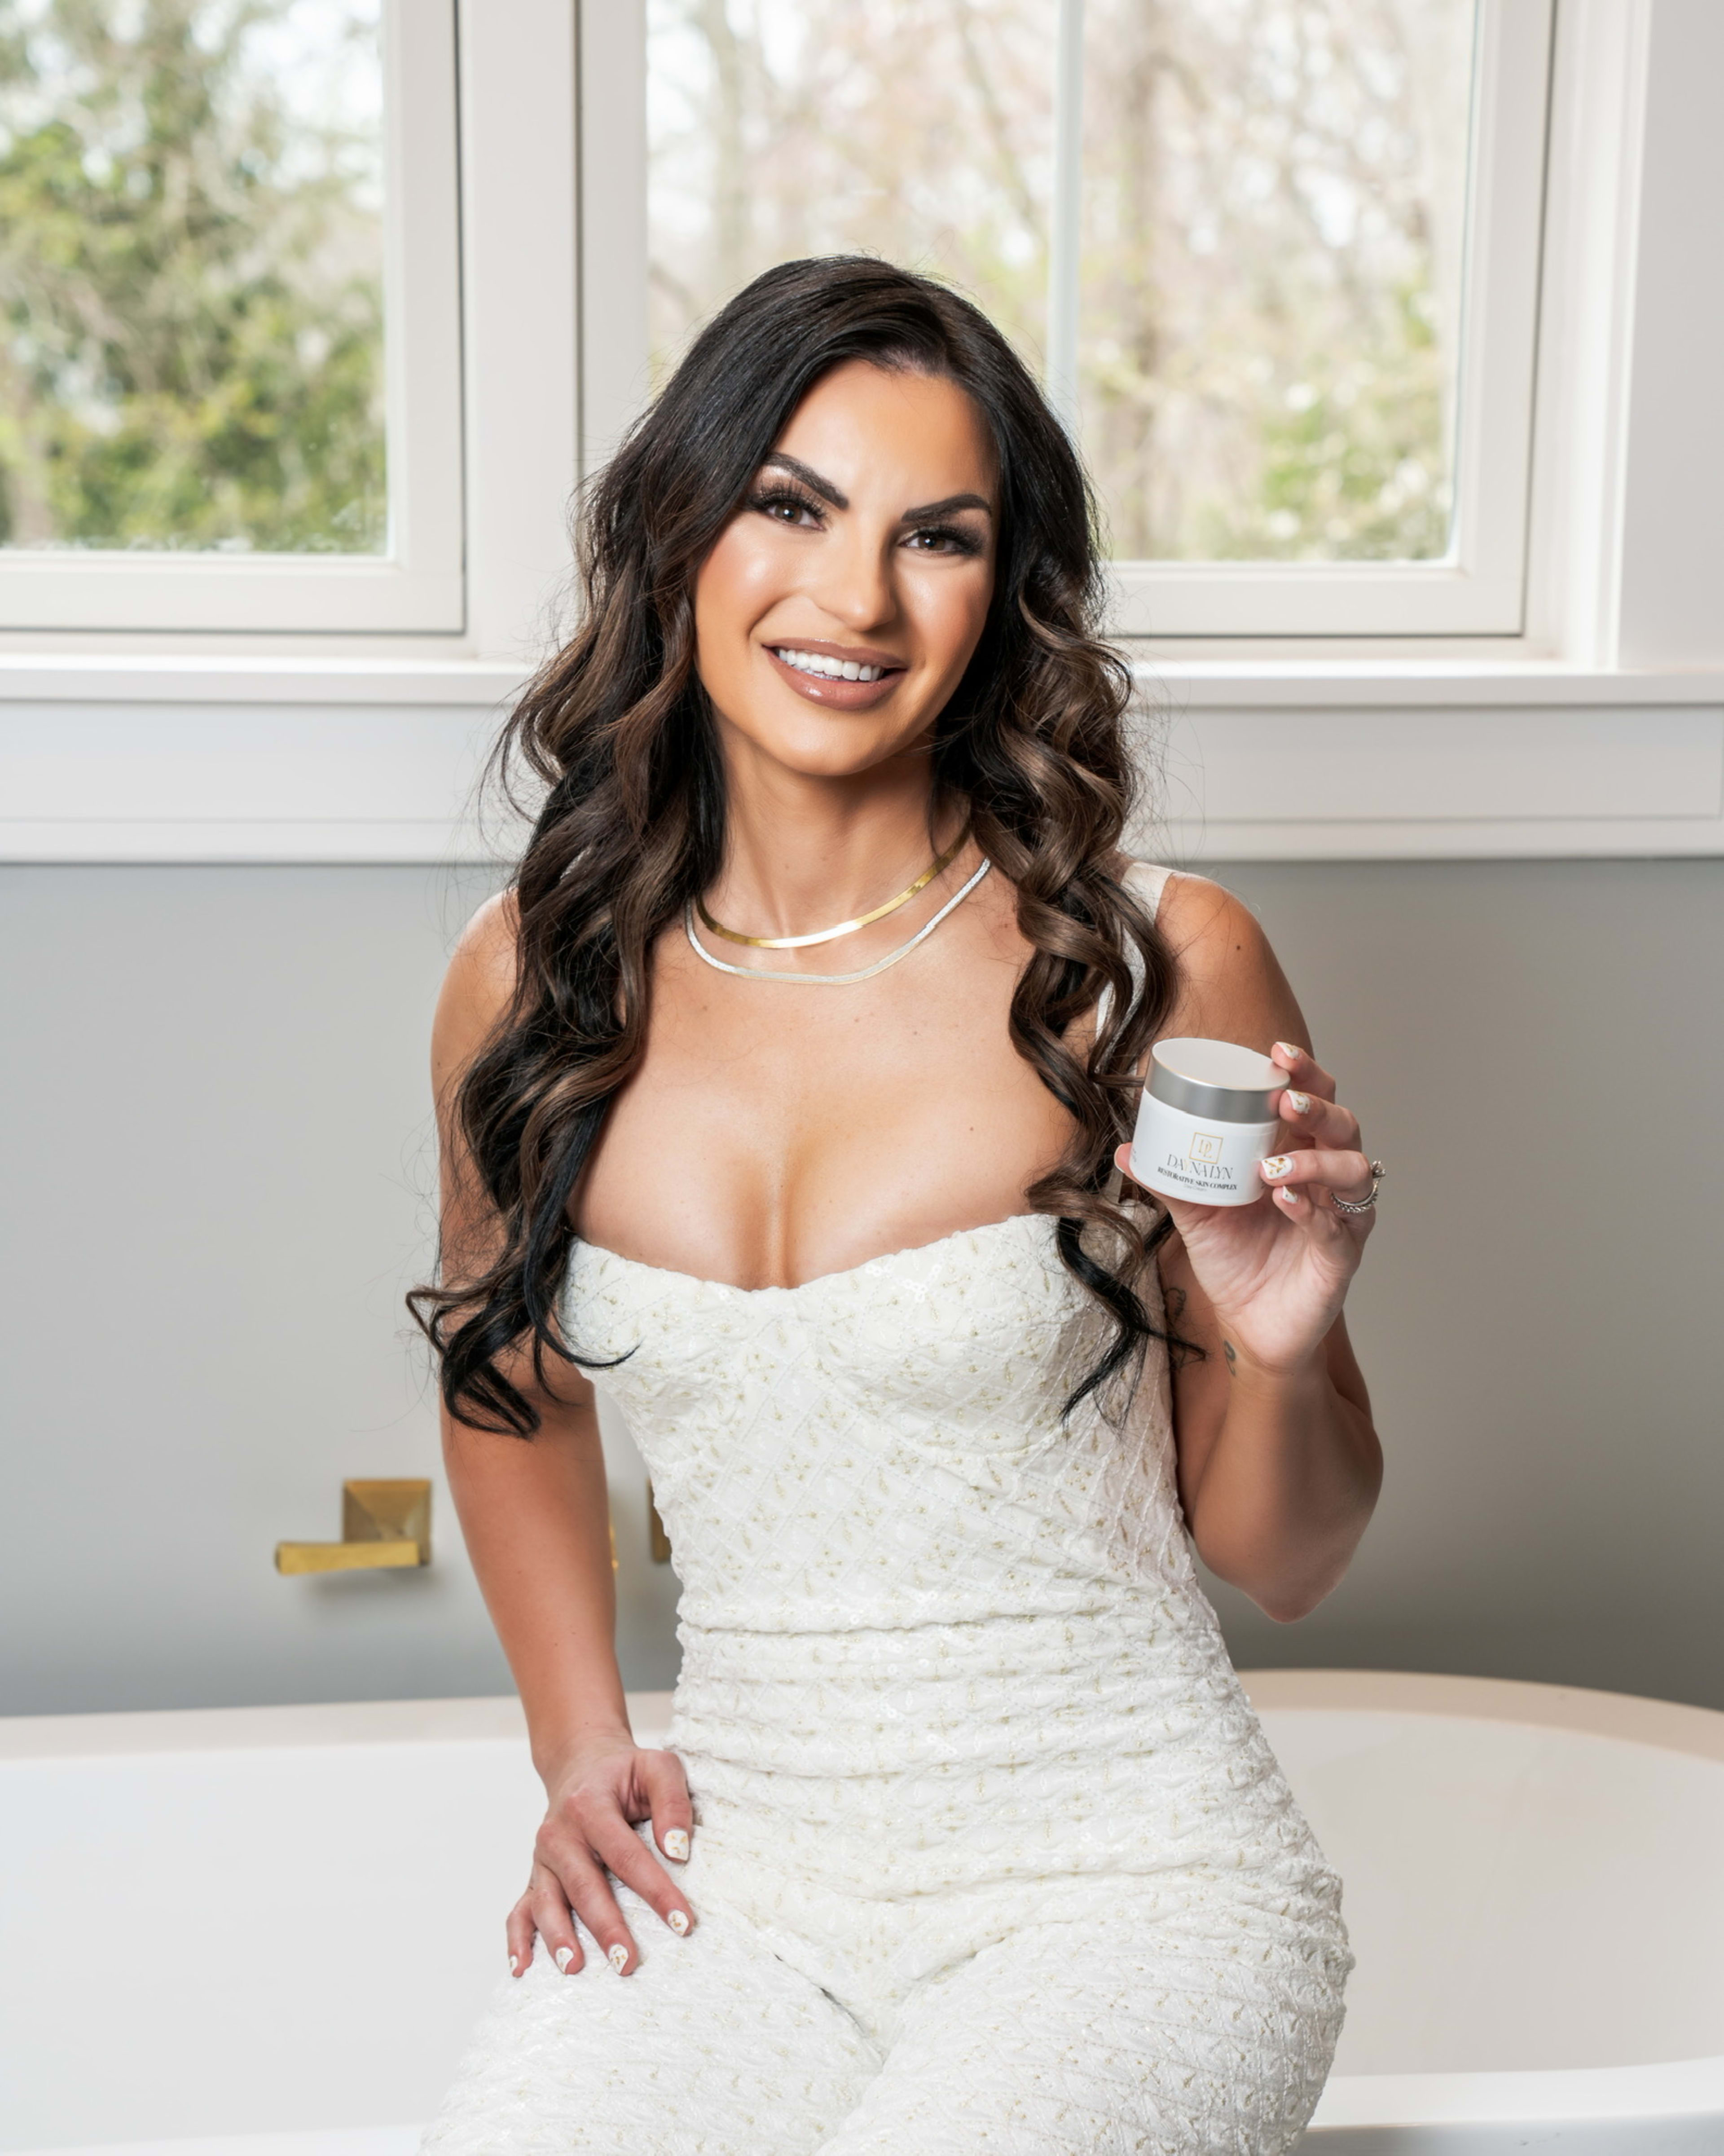 A photoshoot of a woman in white holding a jar of cream.